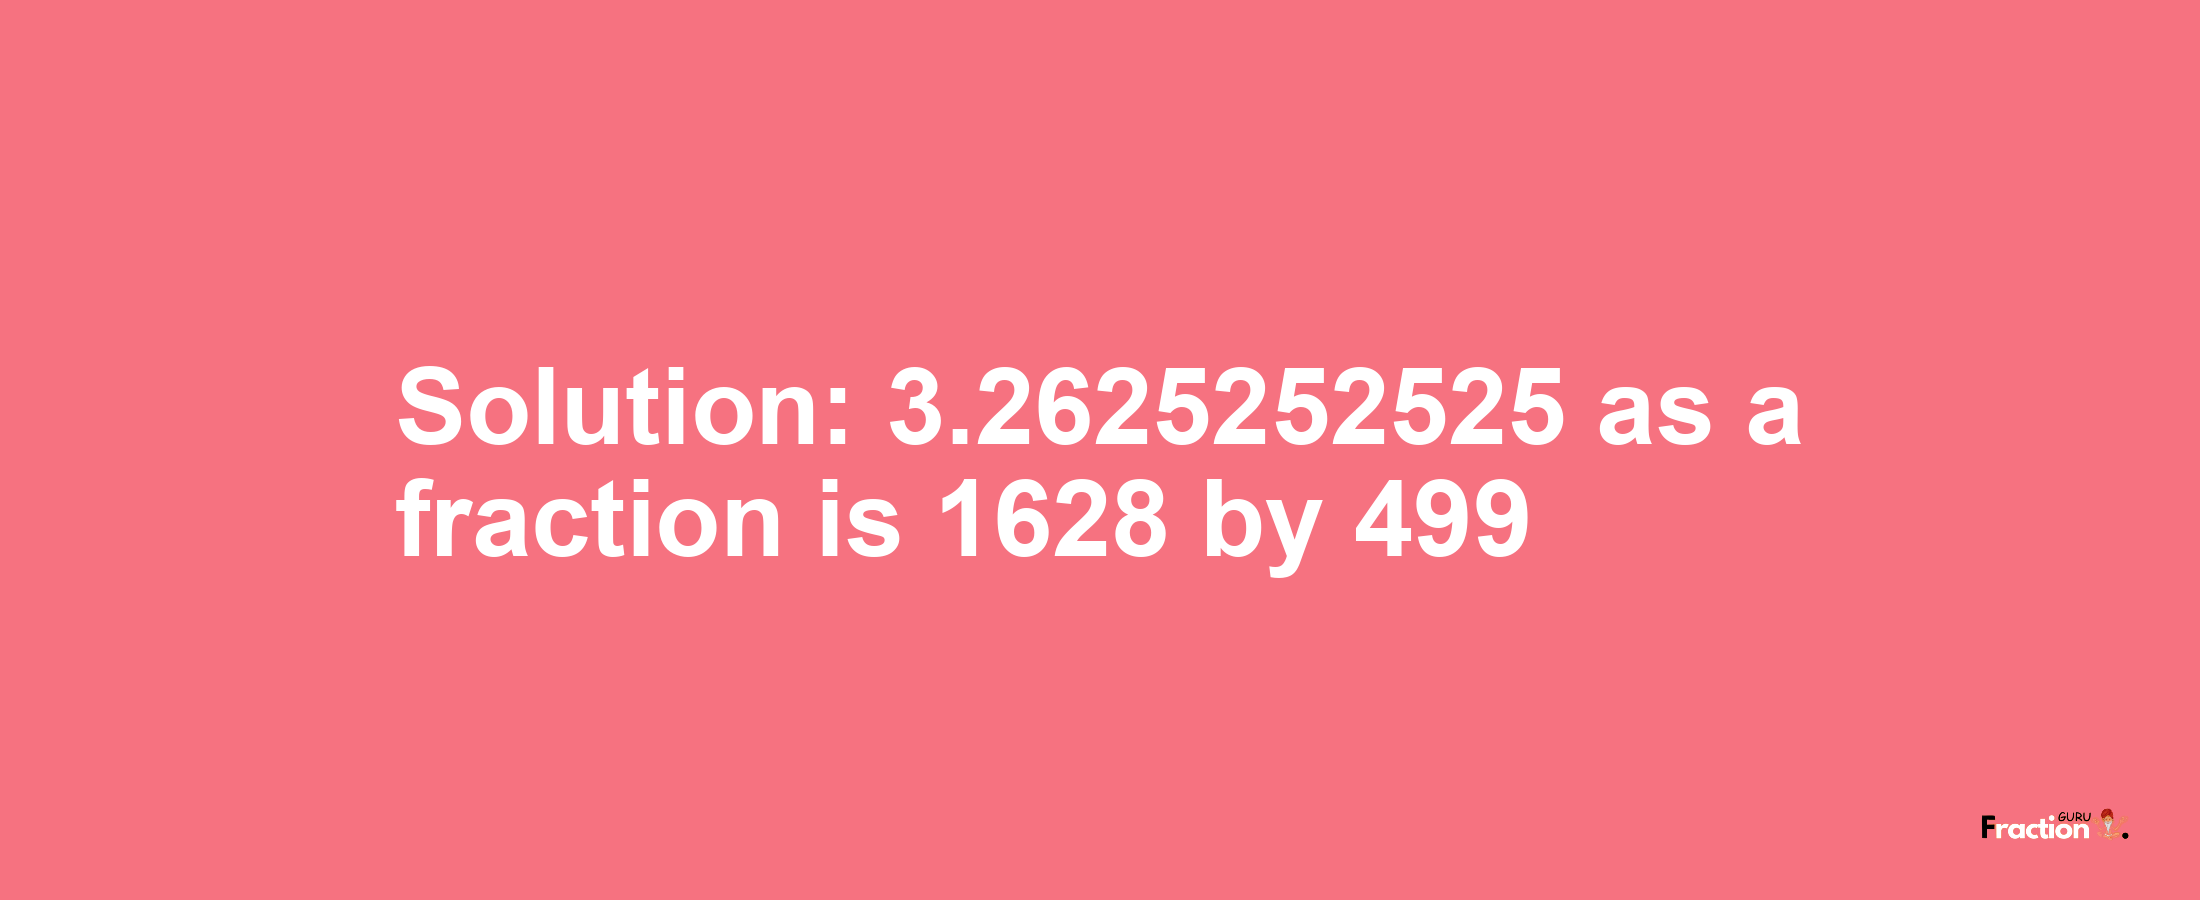 Solution:3.2625252525 as a fraction is 1628/499